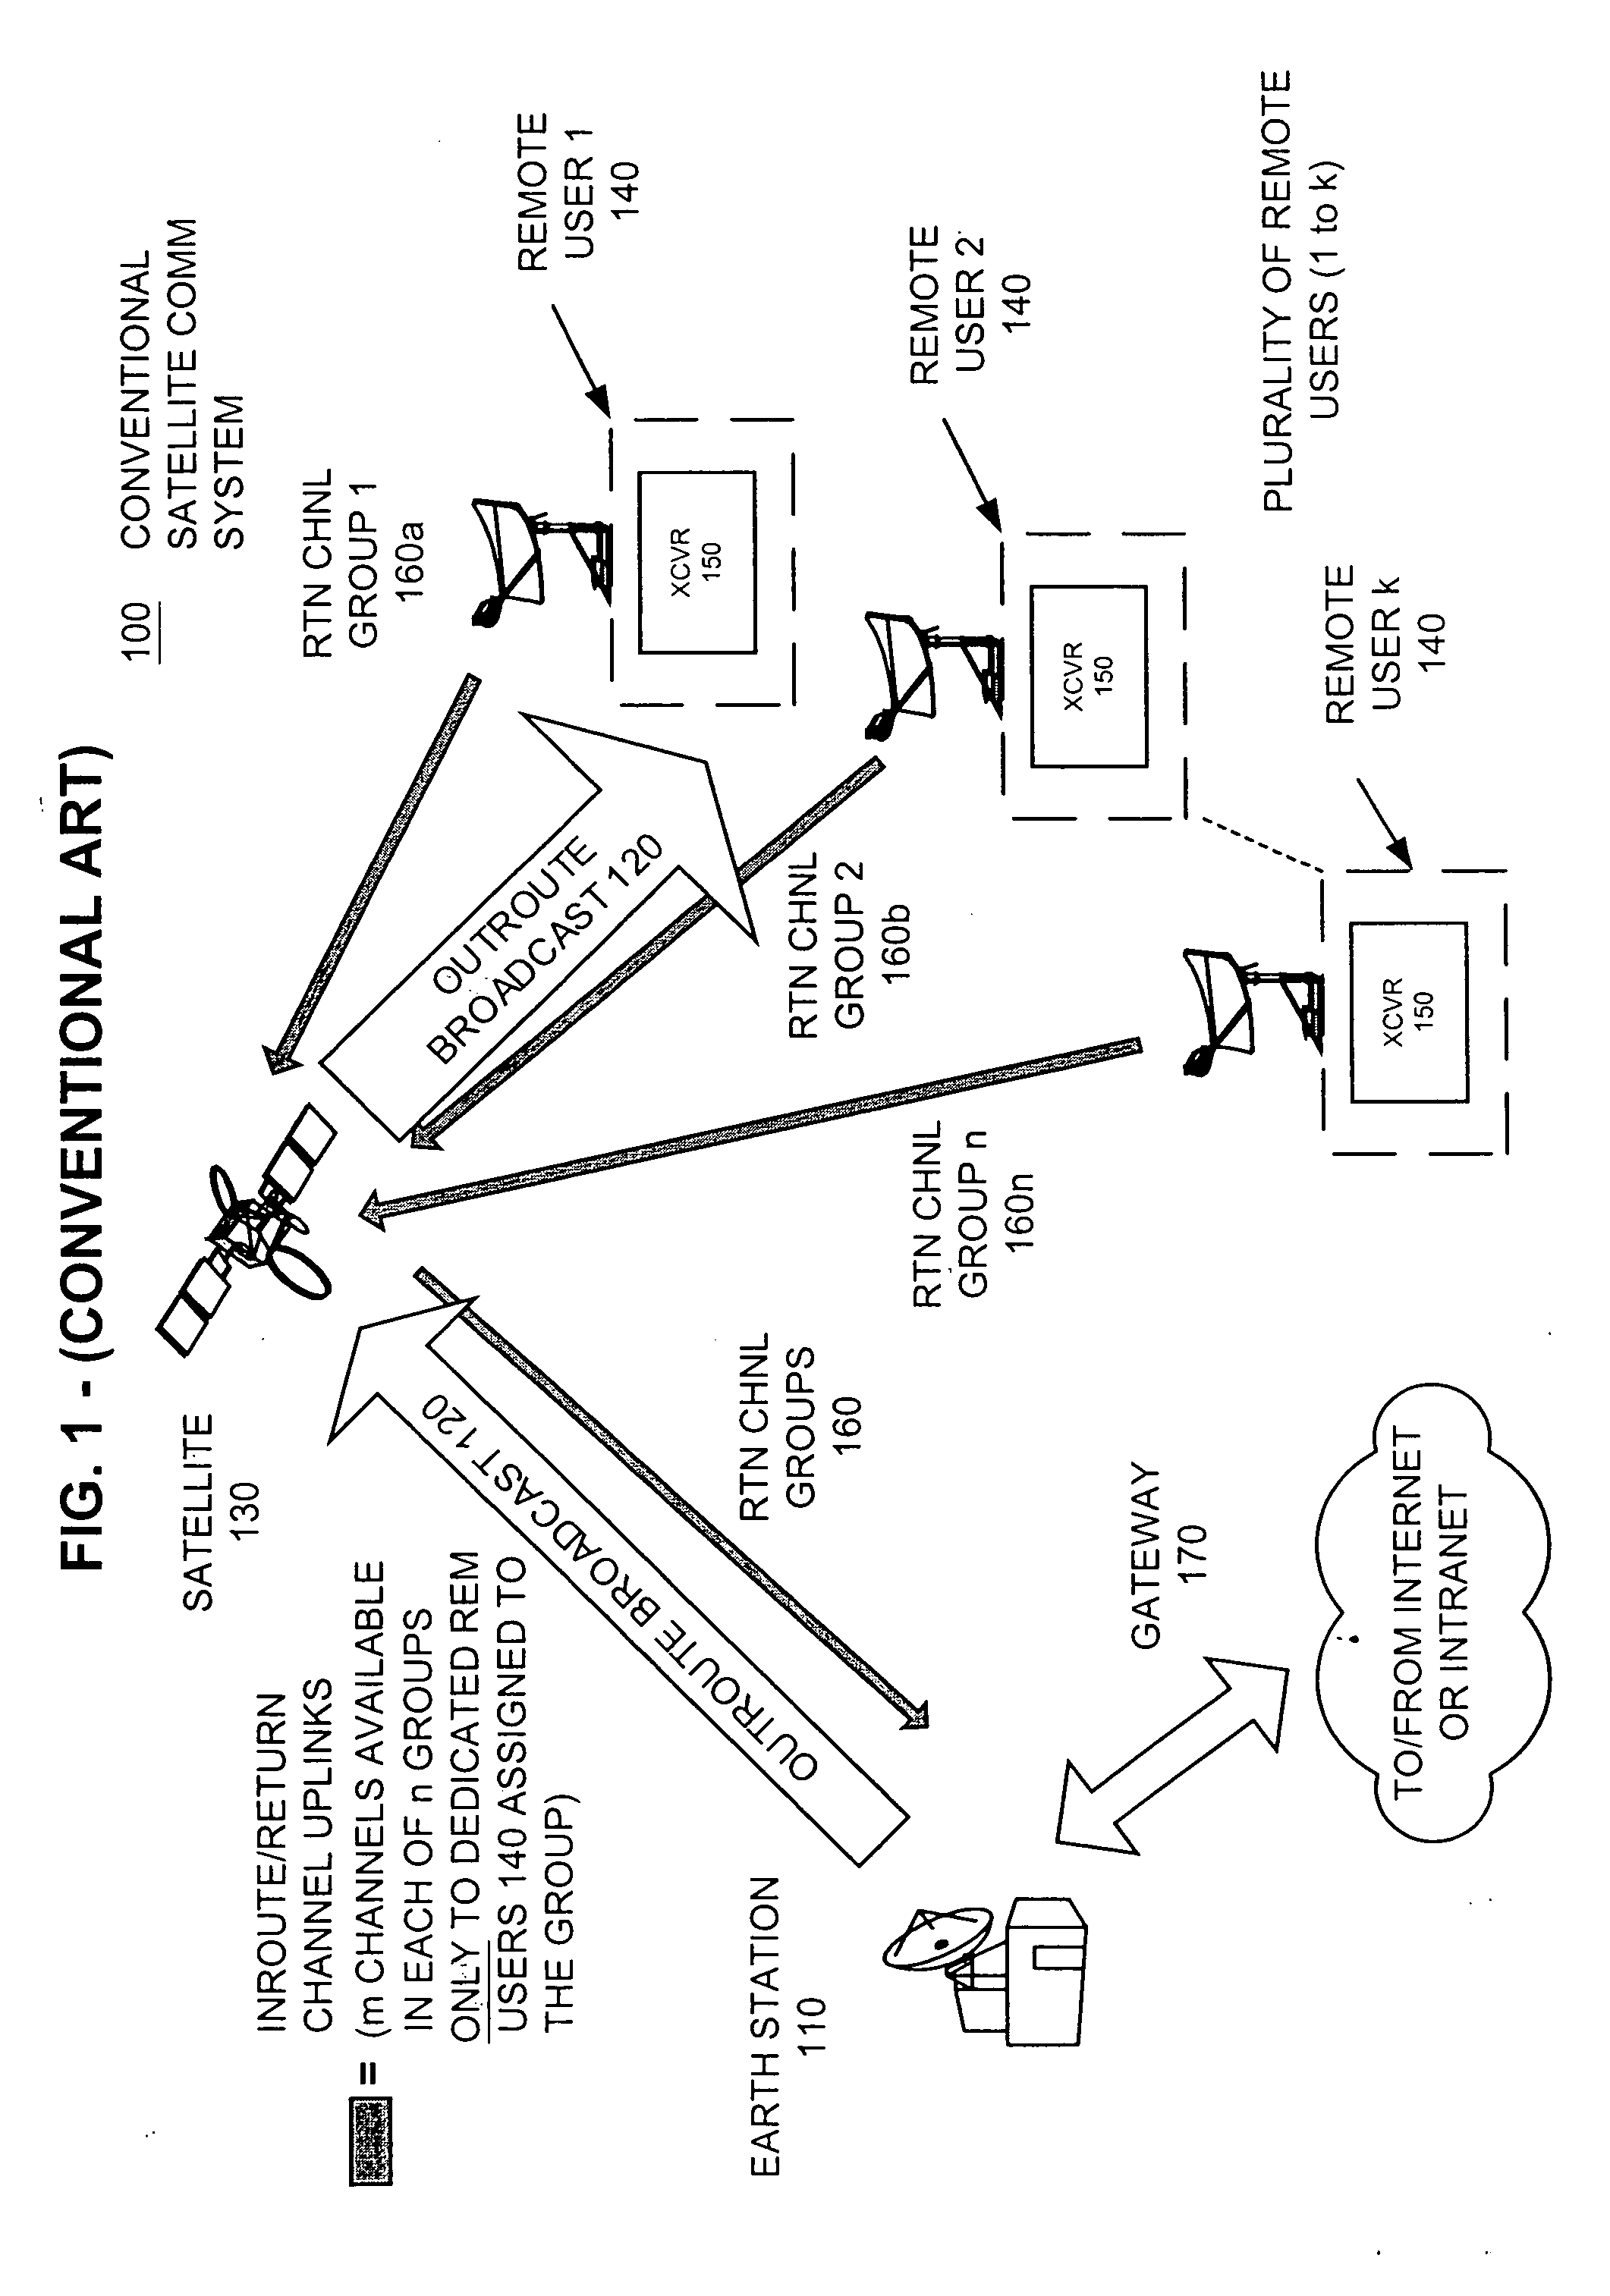 Apparatus and method for efficient TDMA bandwidth allocation for TCP/IP satellite-based networks